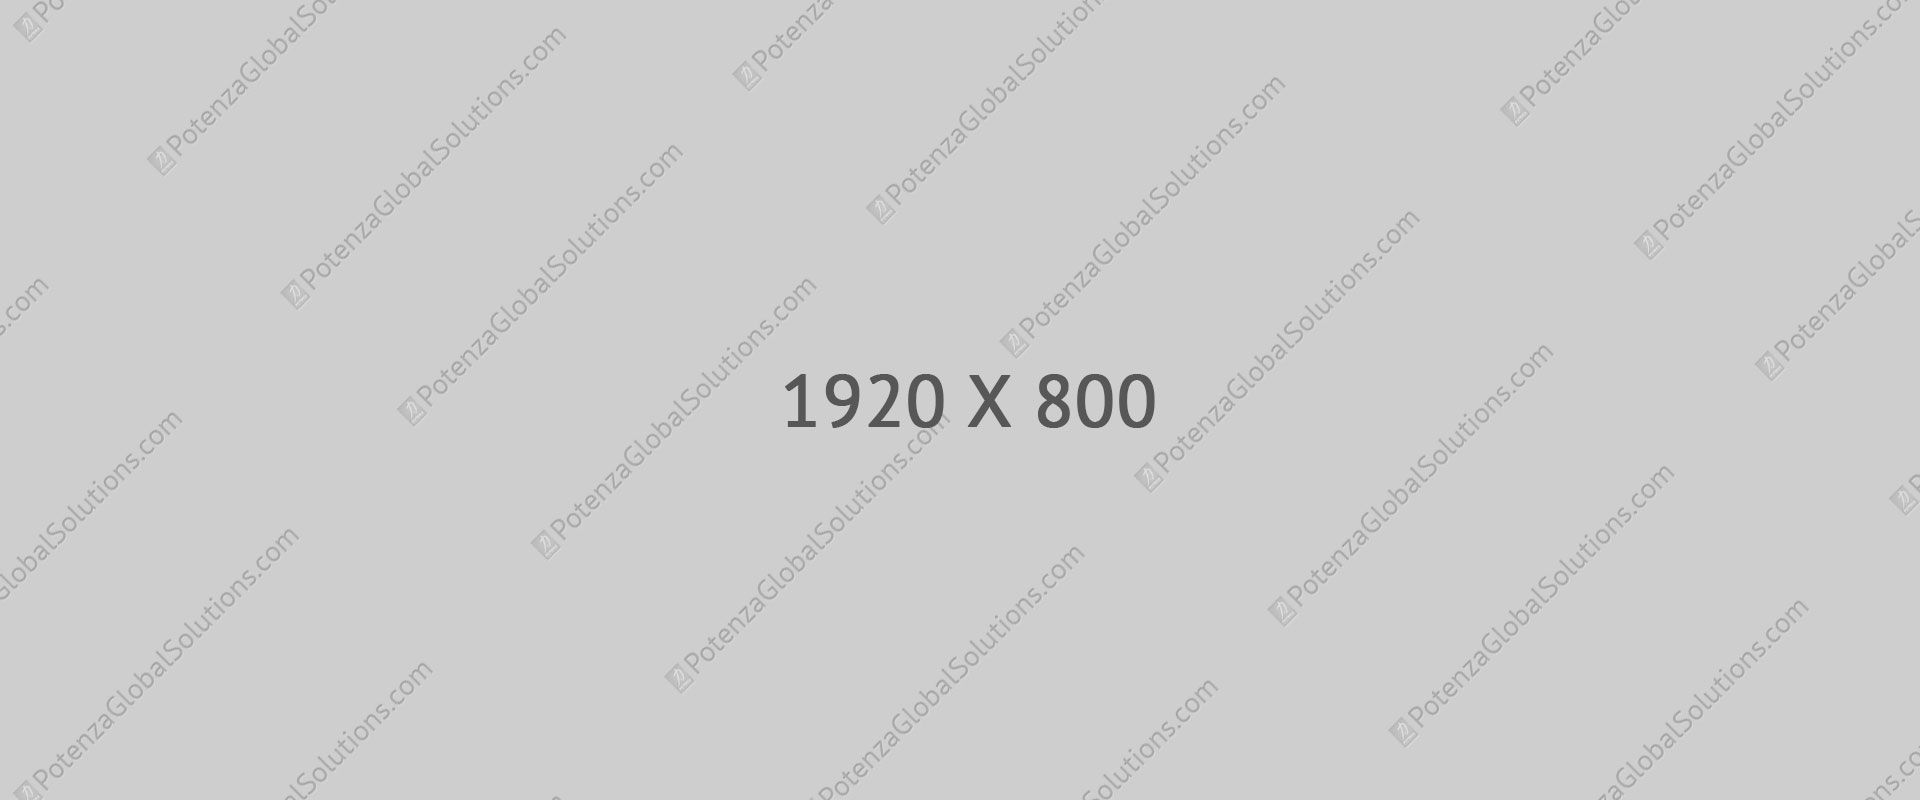 Placeholder image displaying the dimensions "1920 x 800" on a plain gray background.